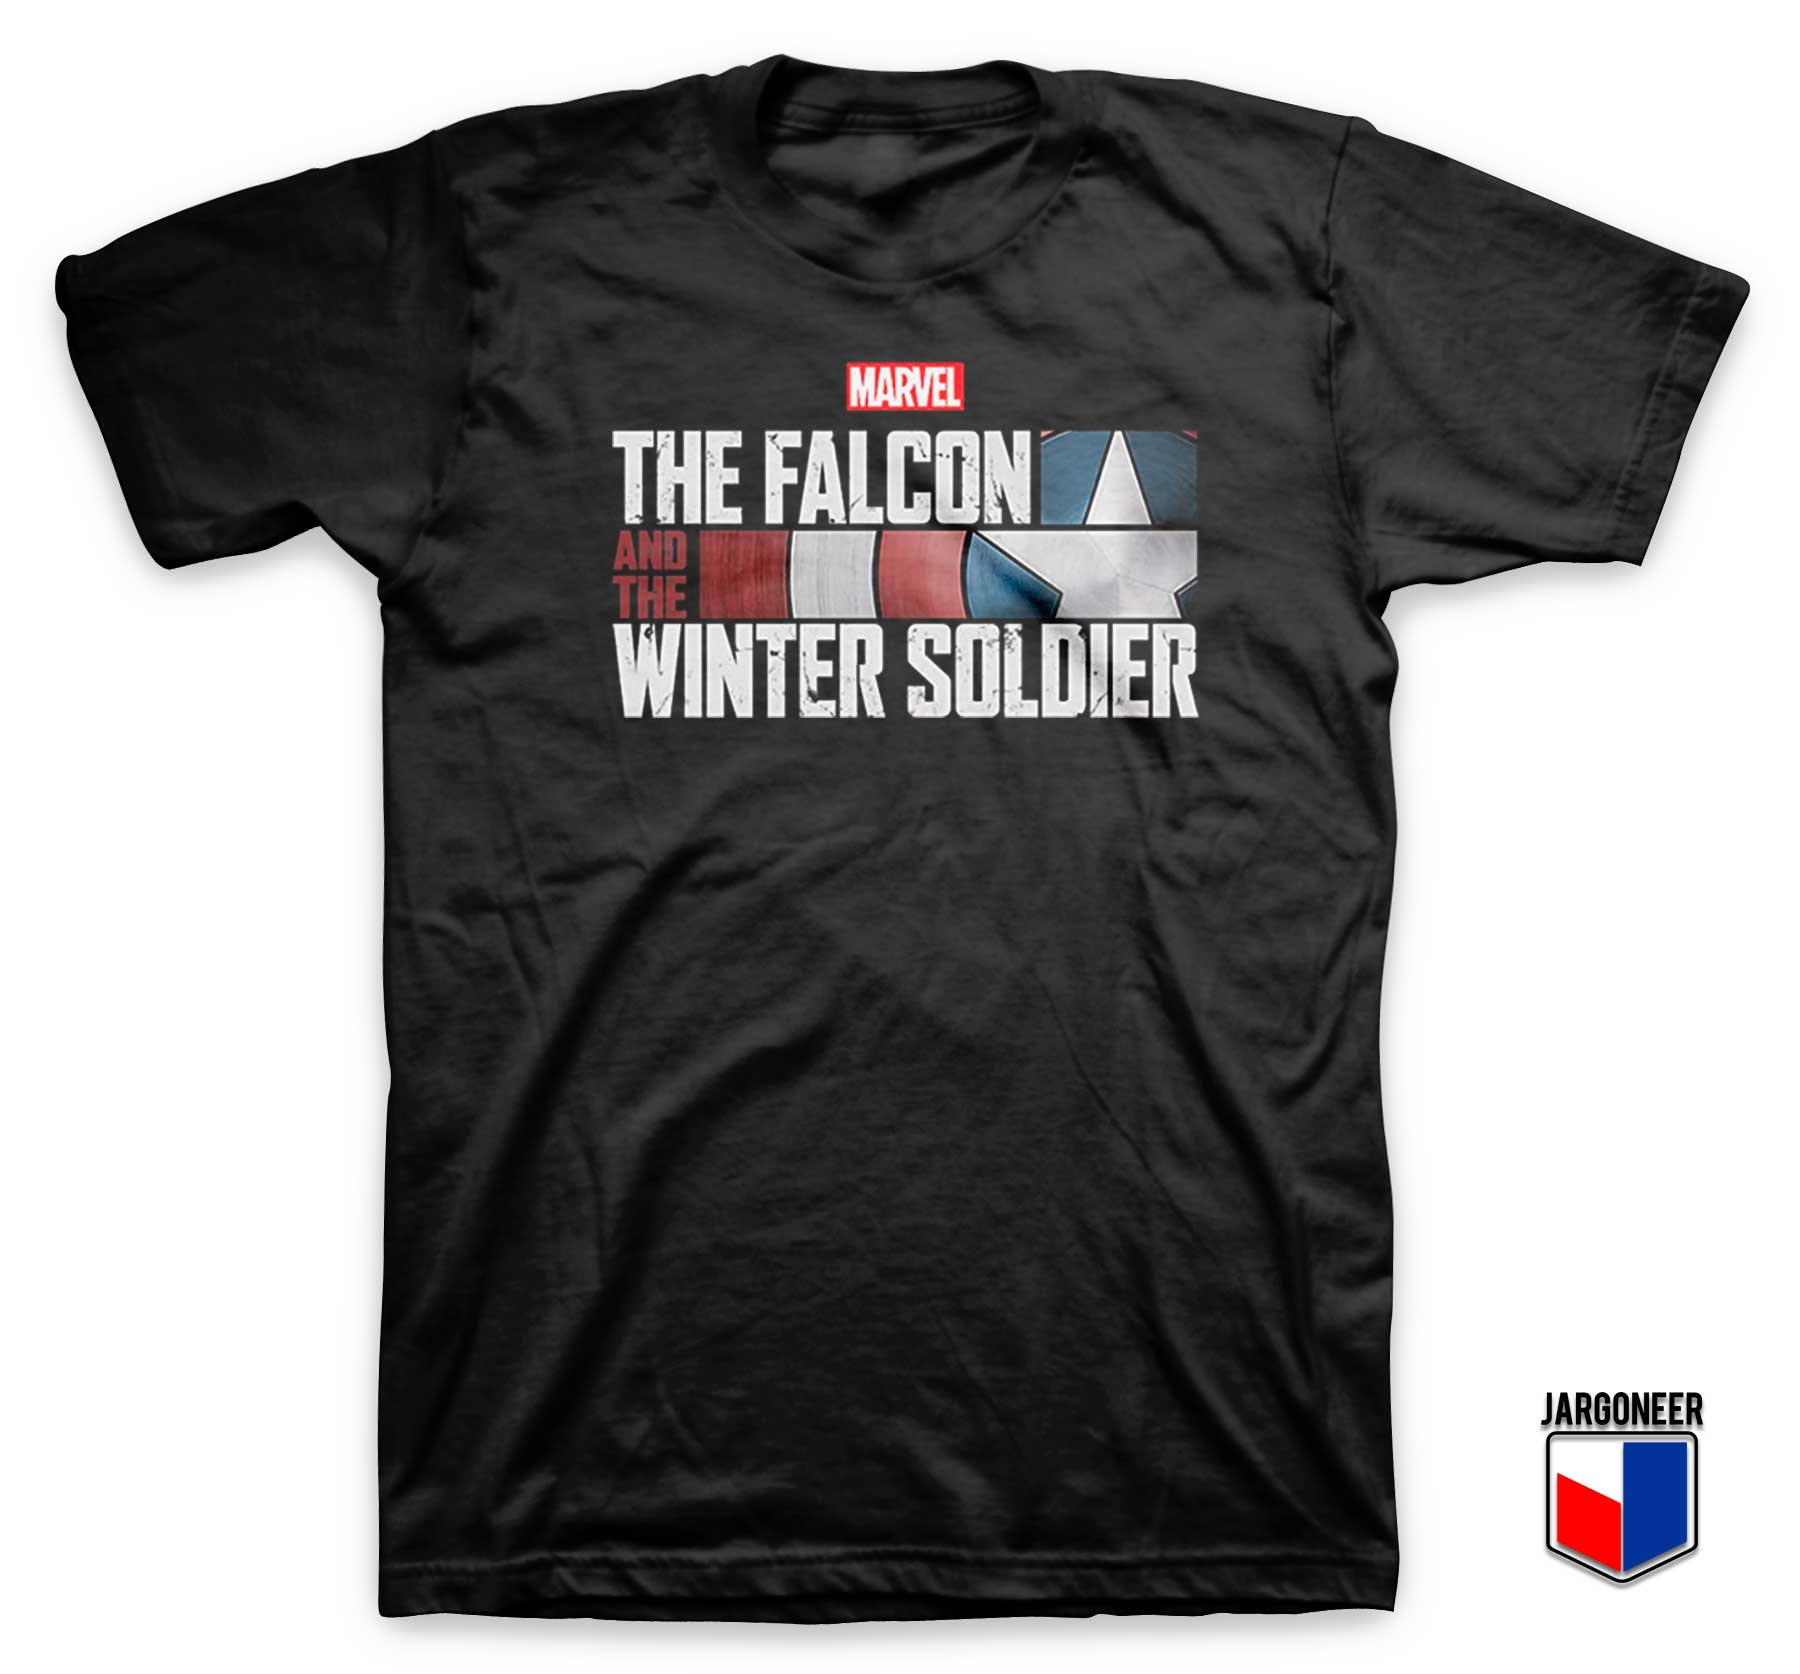 The Falcon And The Winter Soldier T Shirt - Shop Unique Graphic Cool Shirt Designs